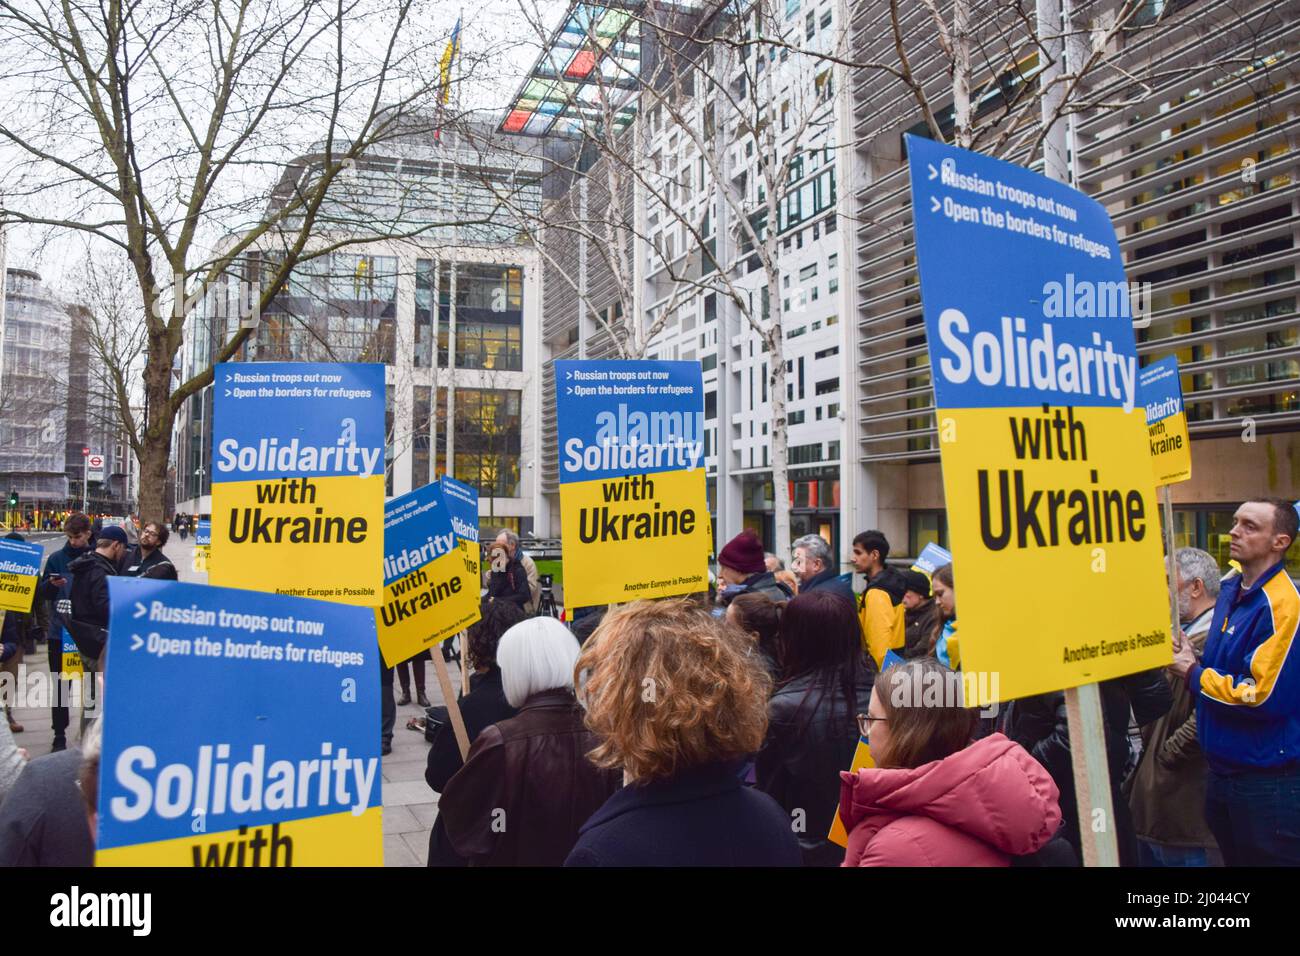 London, UK. 15th March 2022. Protesters gathered outside the Home Office in solidarity with Ukraine and called on the UK Government to waive visa requirements for Ukrainian refugees. Stock Photo